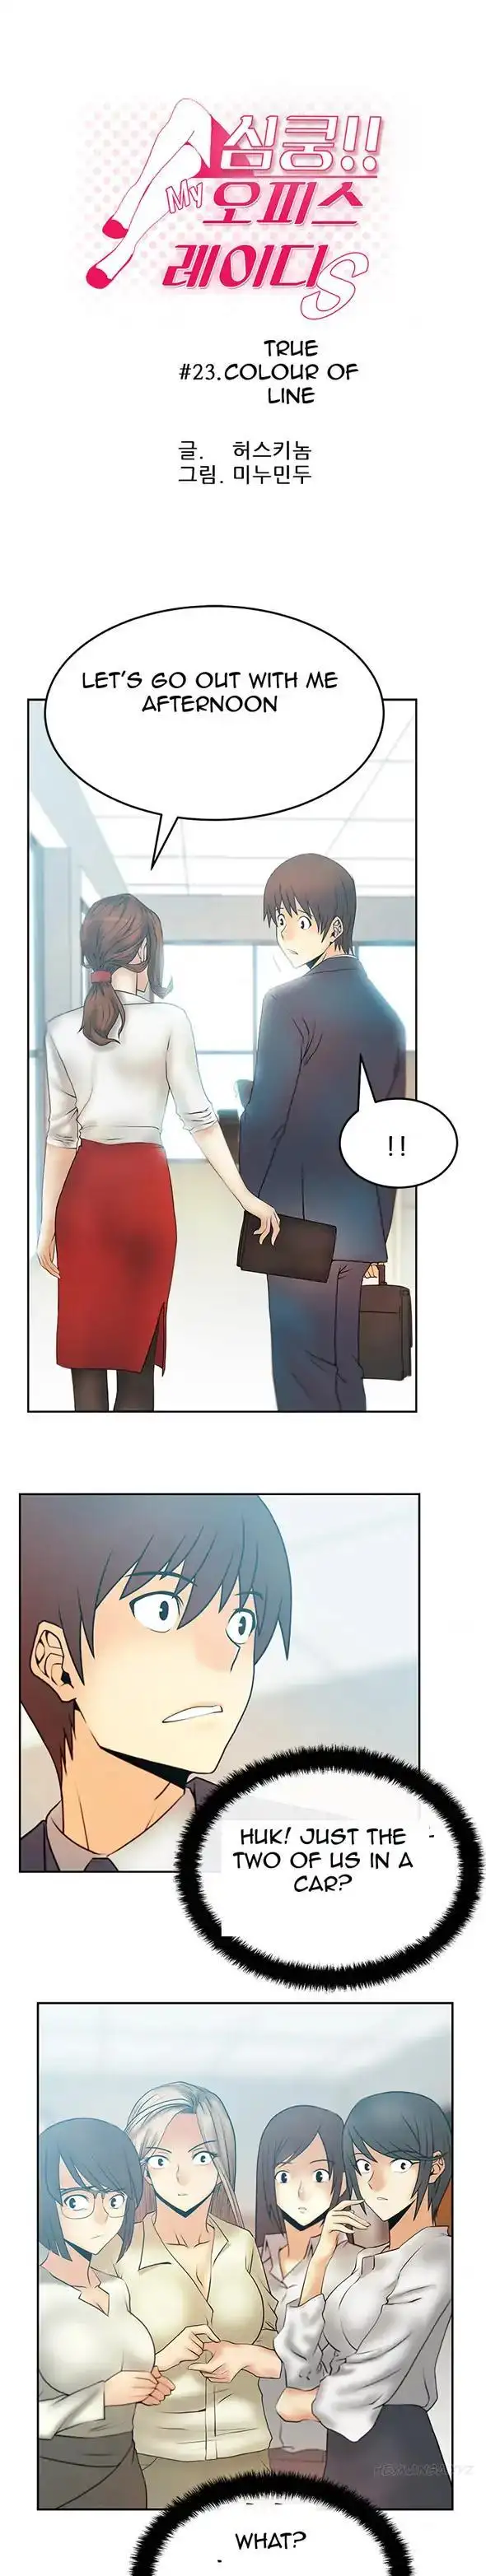 My Office Ladies Chapter 23 - Page 1